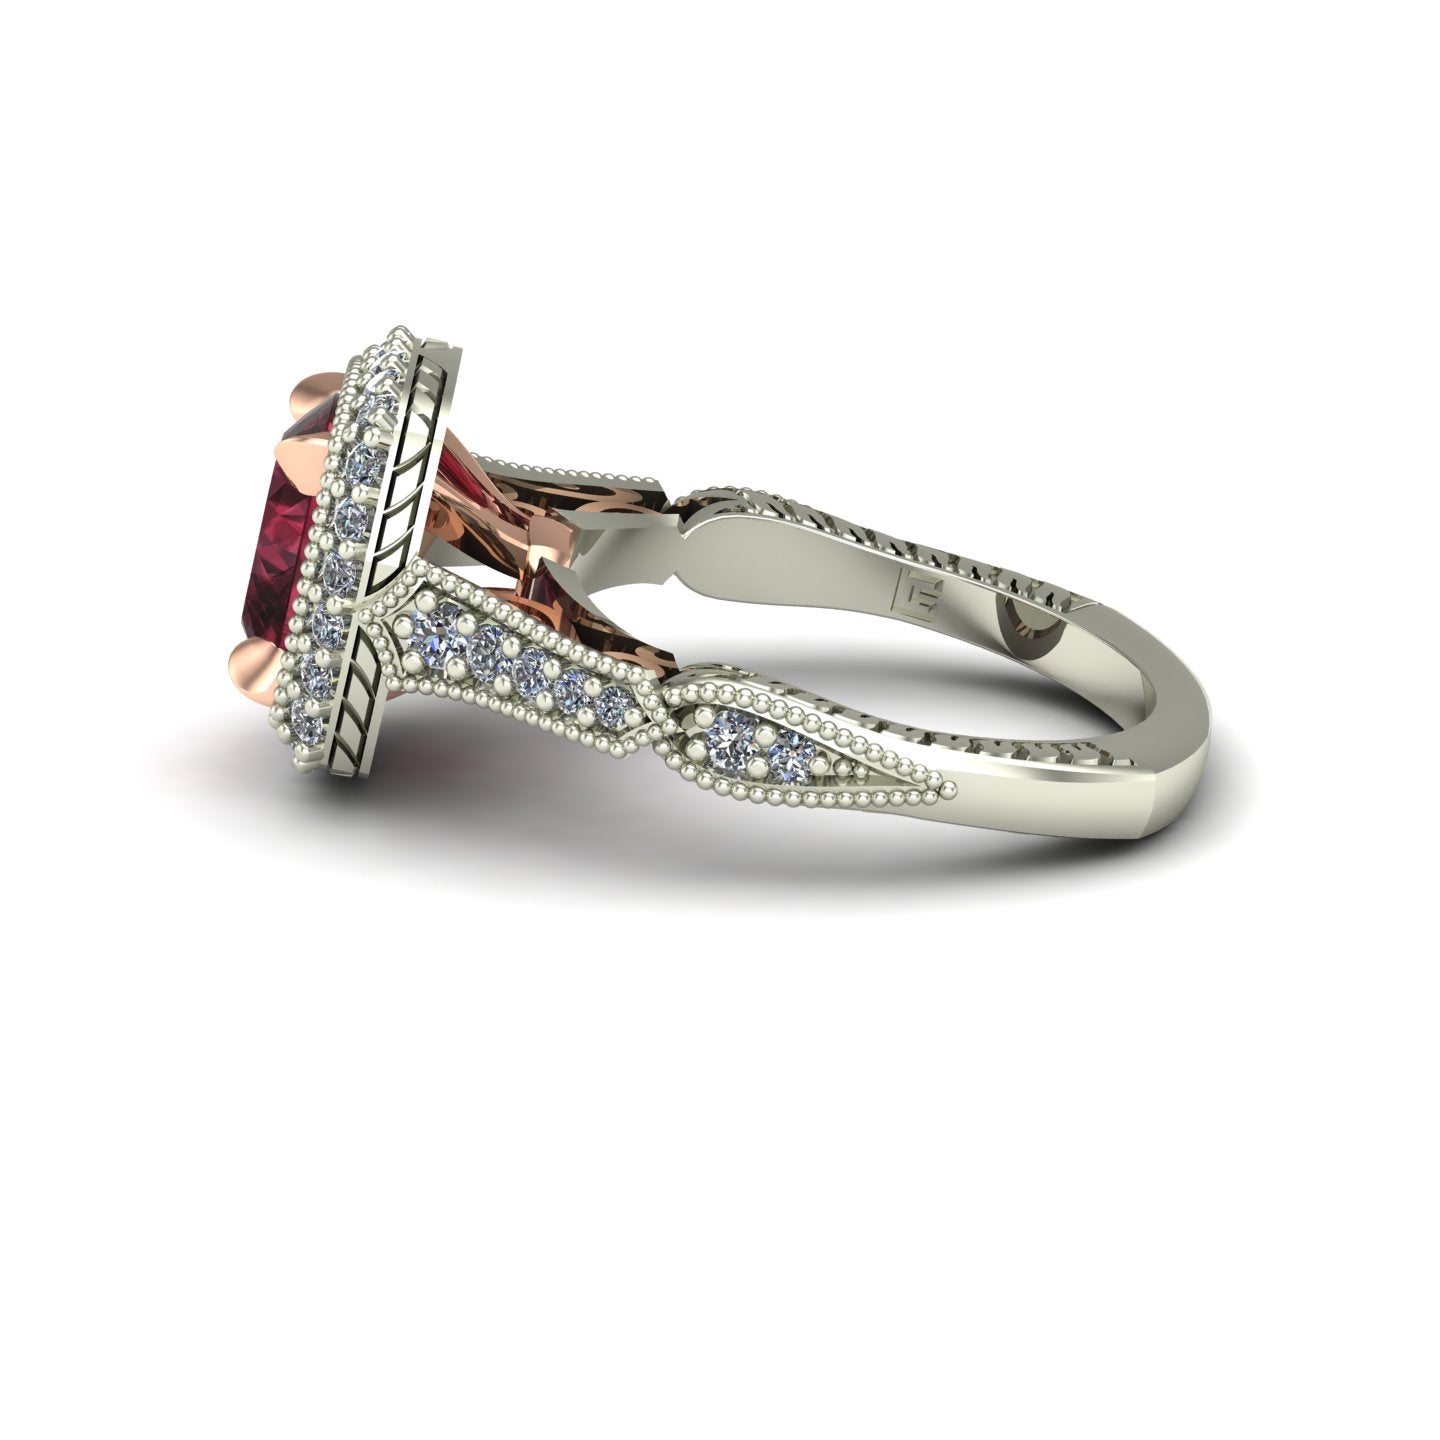 cushion cut rhodolite garnet and diamond halo two tone scroll ring in 14k rose and white gold - Charles Babb Designs - side view